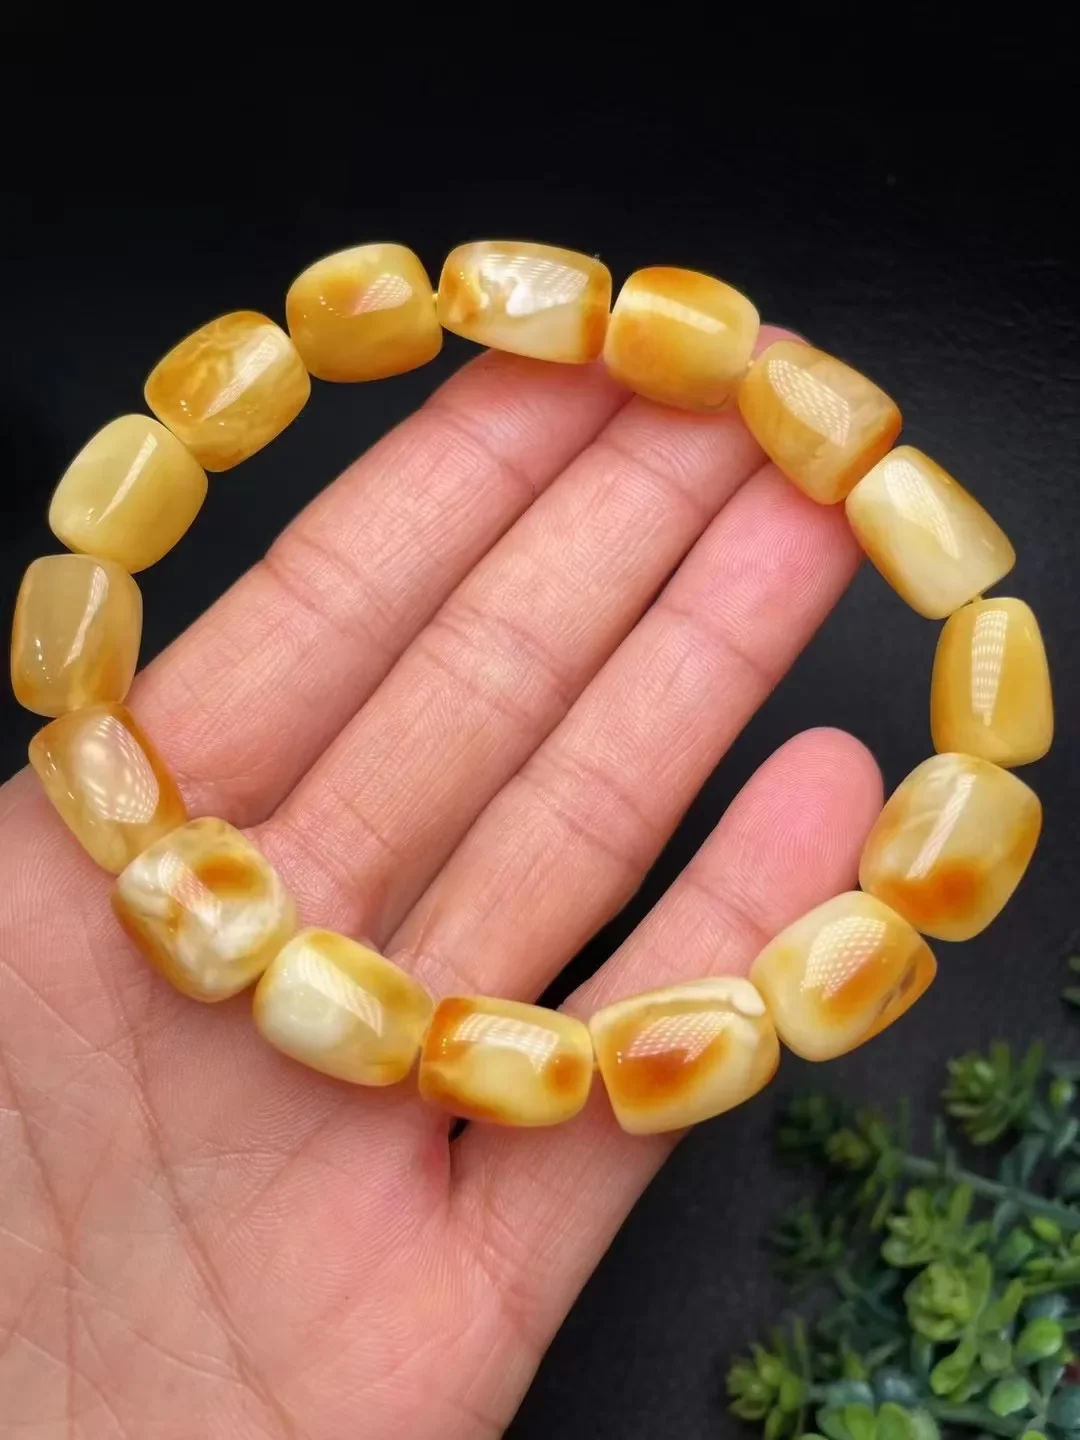 

New arrival natural stone yellow beeswax amber 17.8g bracelet smooth round beads loose fine jewelry making diy bracelets